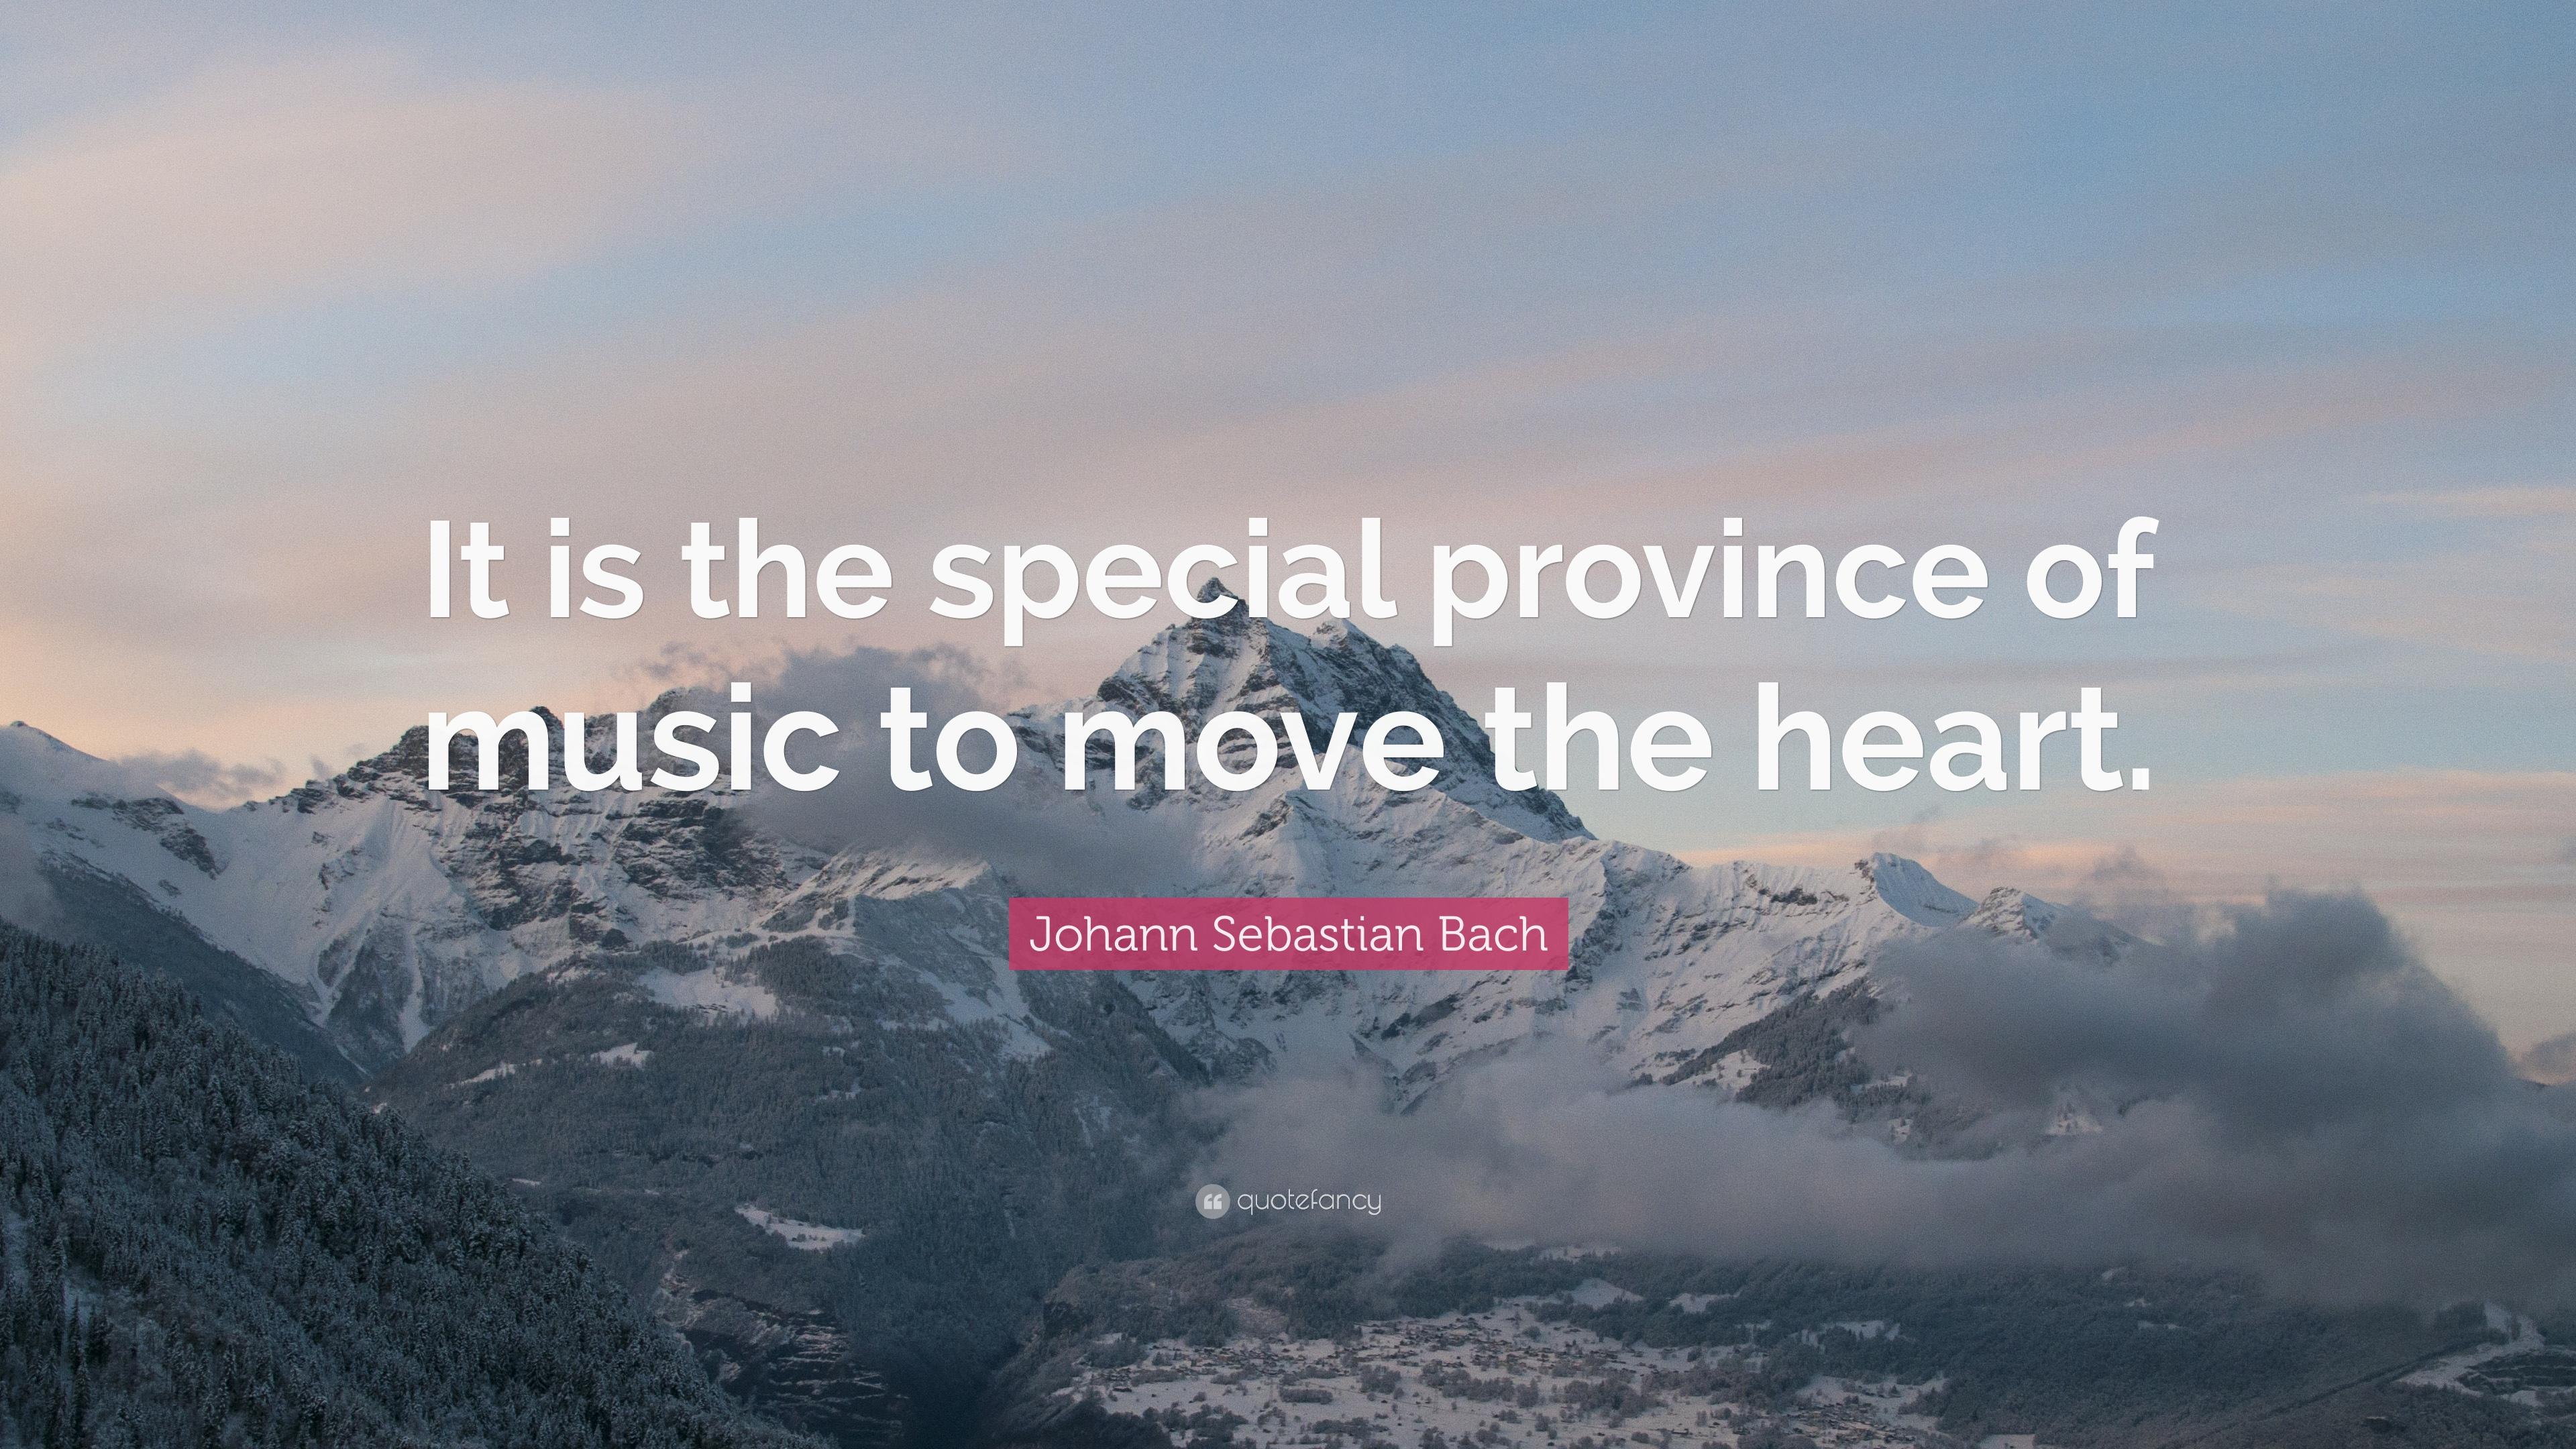 Johann Sebastian Bach Quote: “It is the special province of music to